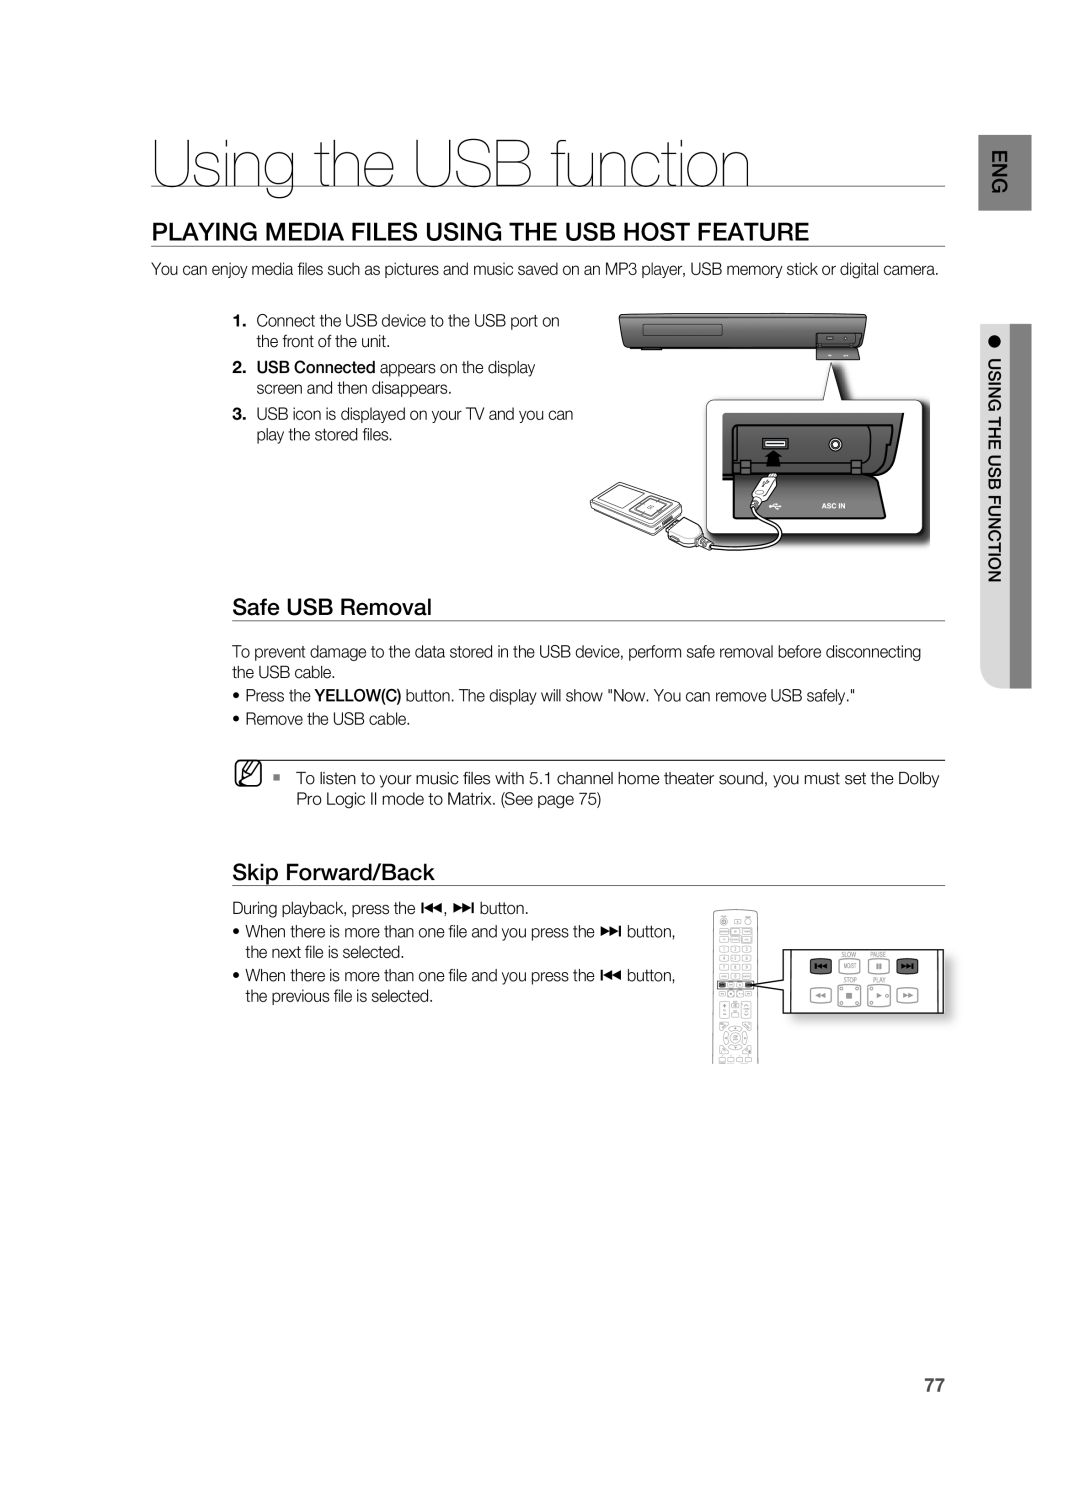 Samsung HT-BD3252 user manual Using the USB function, Playing Media Files Using The Usb Host Feature, Safe USB Removal 